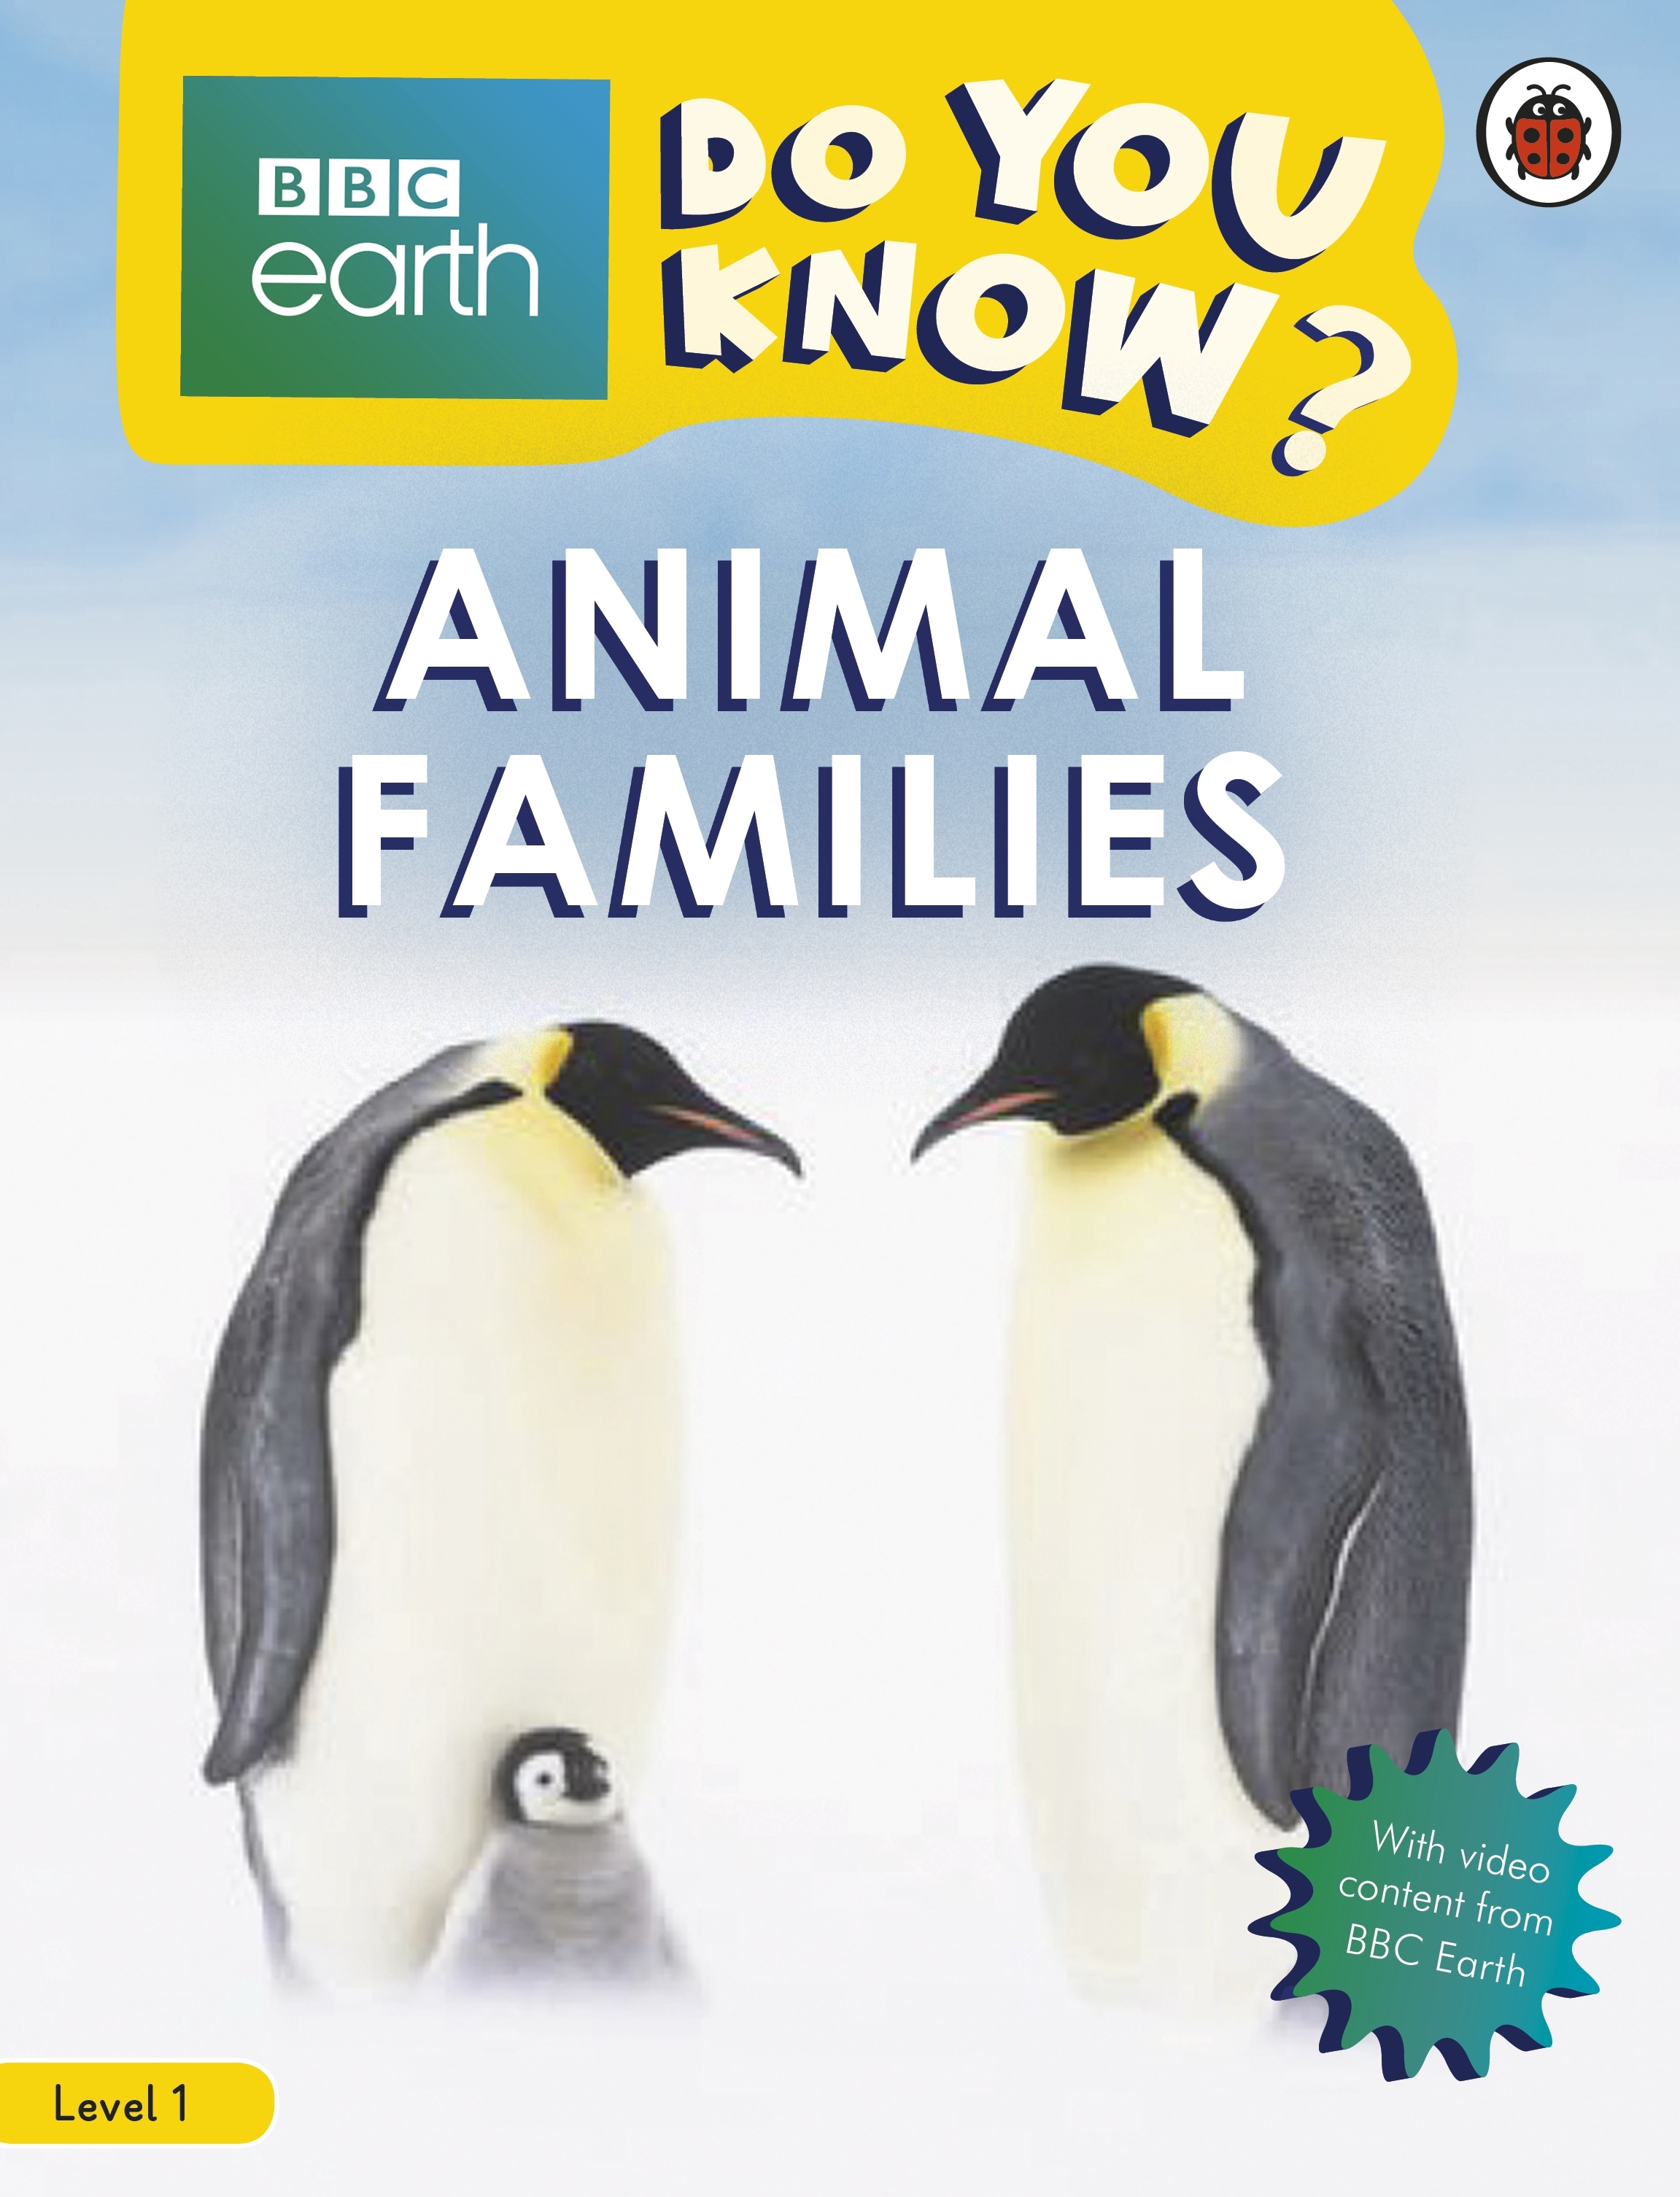 Do You Know? Level 1 – BBC Earth Animal Families